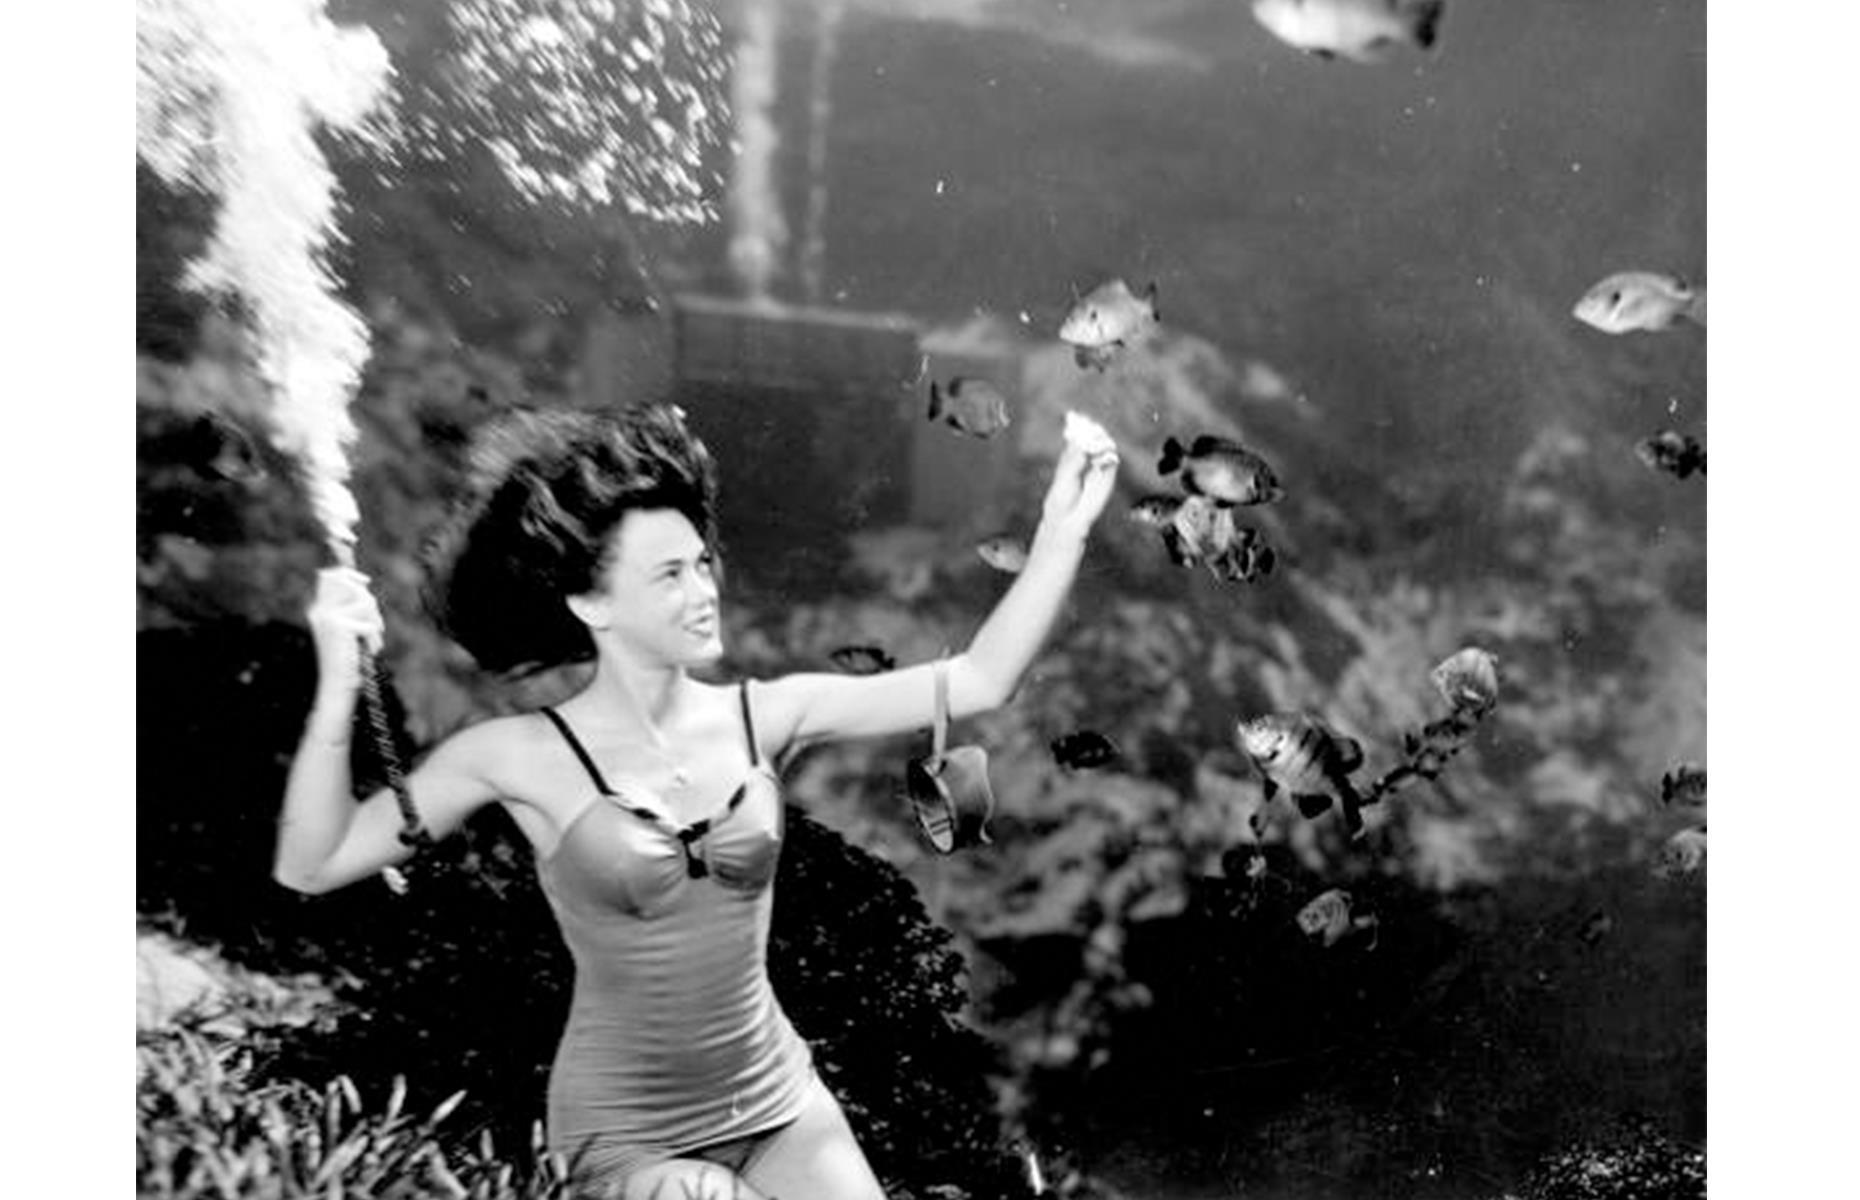 <p>One of Florida’s most unique and long-running attractions, the mermaid show at Weeki Wachee Springs State Park opened in 1947. It was the brainchild of former Navy man, Newton Perry, who built an 18-seat theater into the limestone below the water’s surface, allowing viewers to look right into the deep. He trained performers to breathe underwater and execute synchronized dance routines. In the 1950s, it was one of the nation’s most popular tourist stops and received worldwide acclaim. The attraction still remains today.</p>